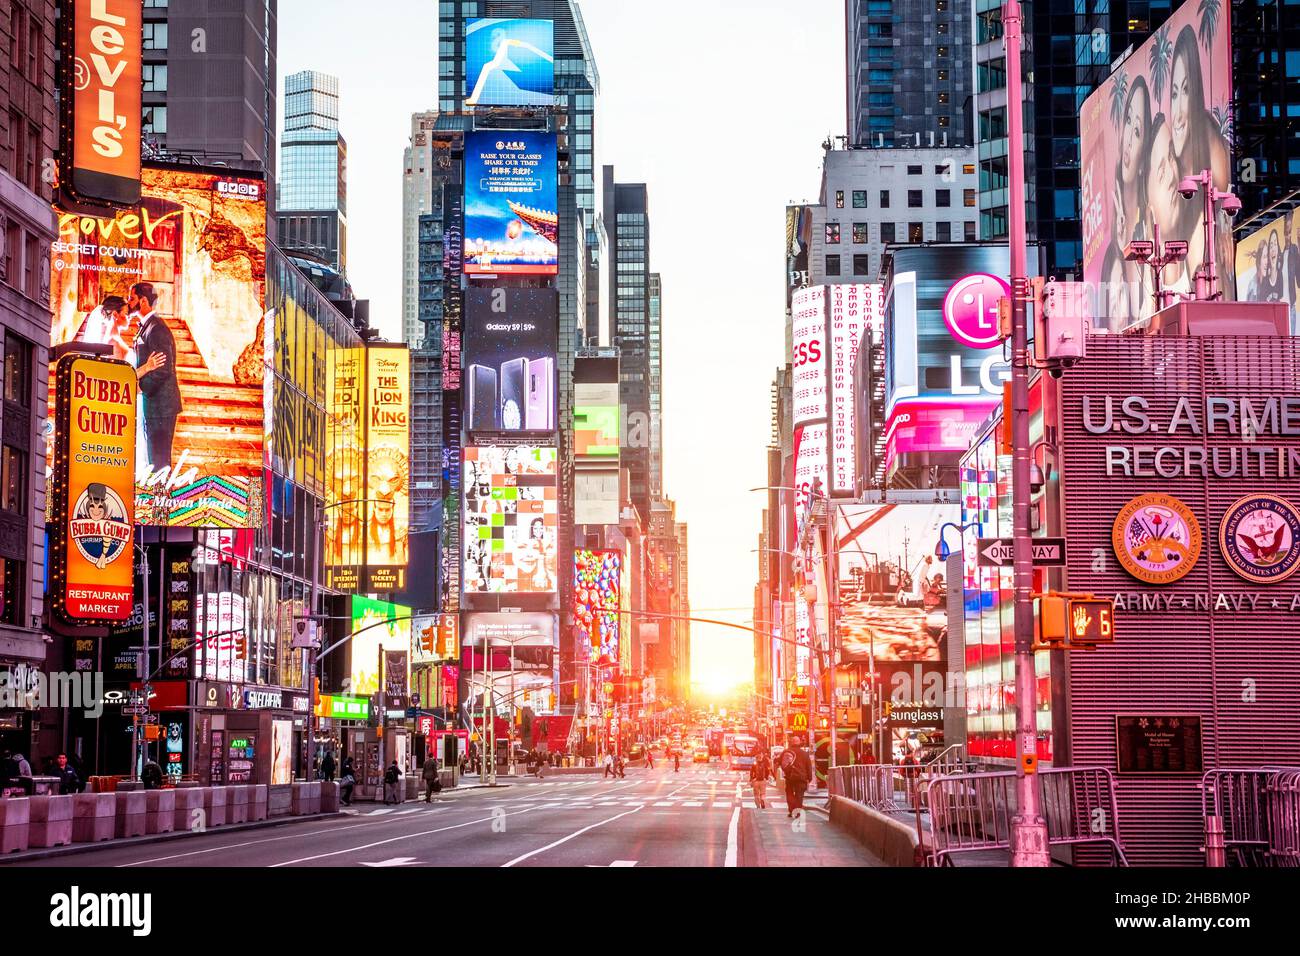 New York, USA - August 10, 2018: View of New York city in the USA at Times Square showcasing its neon lights and endless stores with lots of tourists. Stock Photo